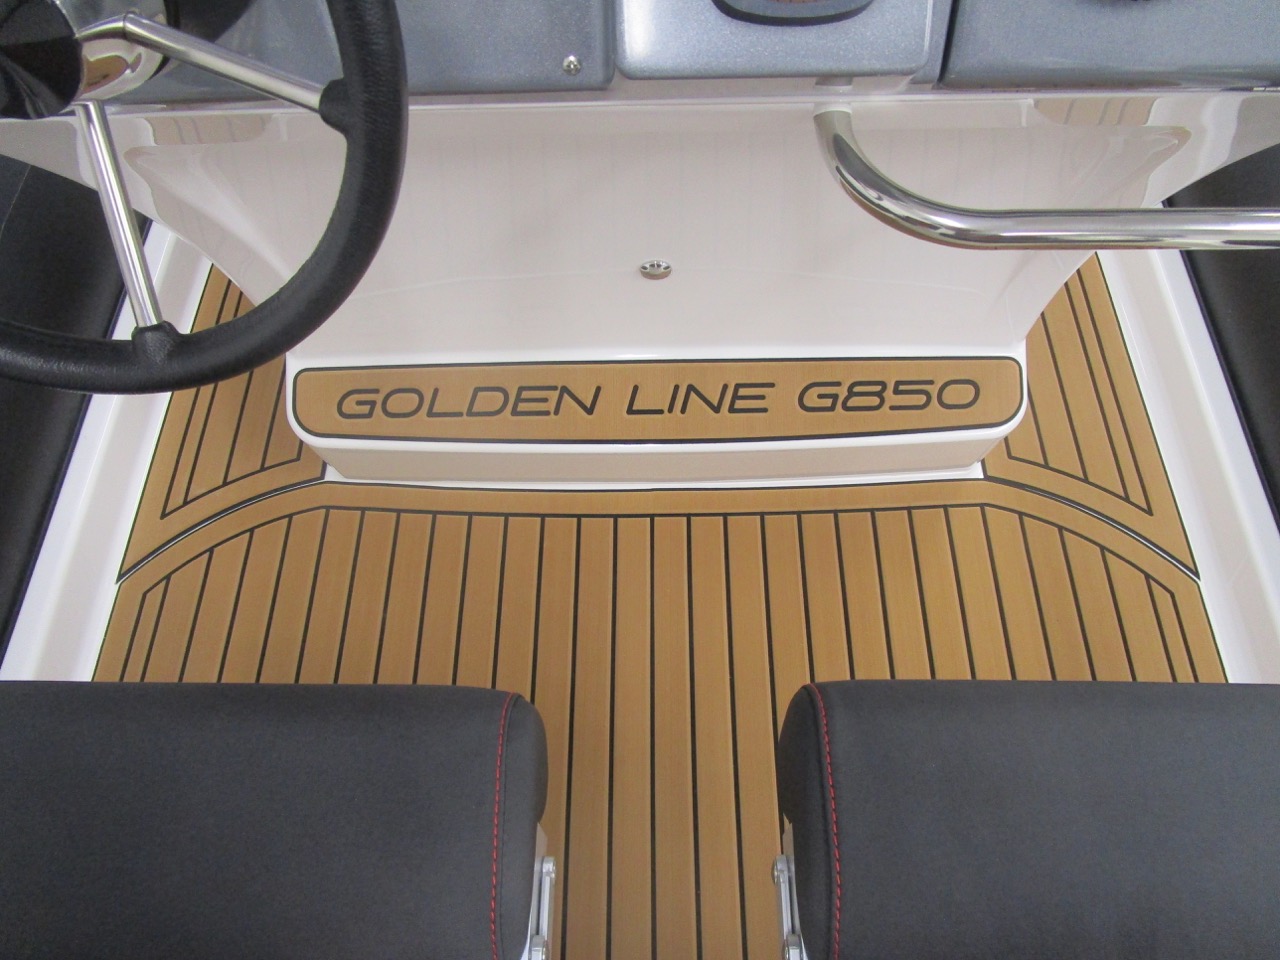 GRAND G850 RIB helm seats extended